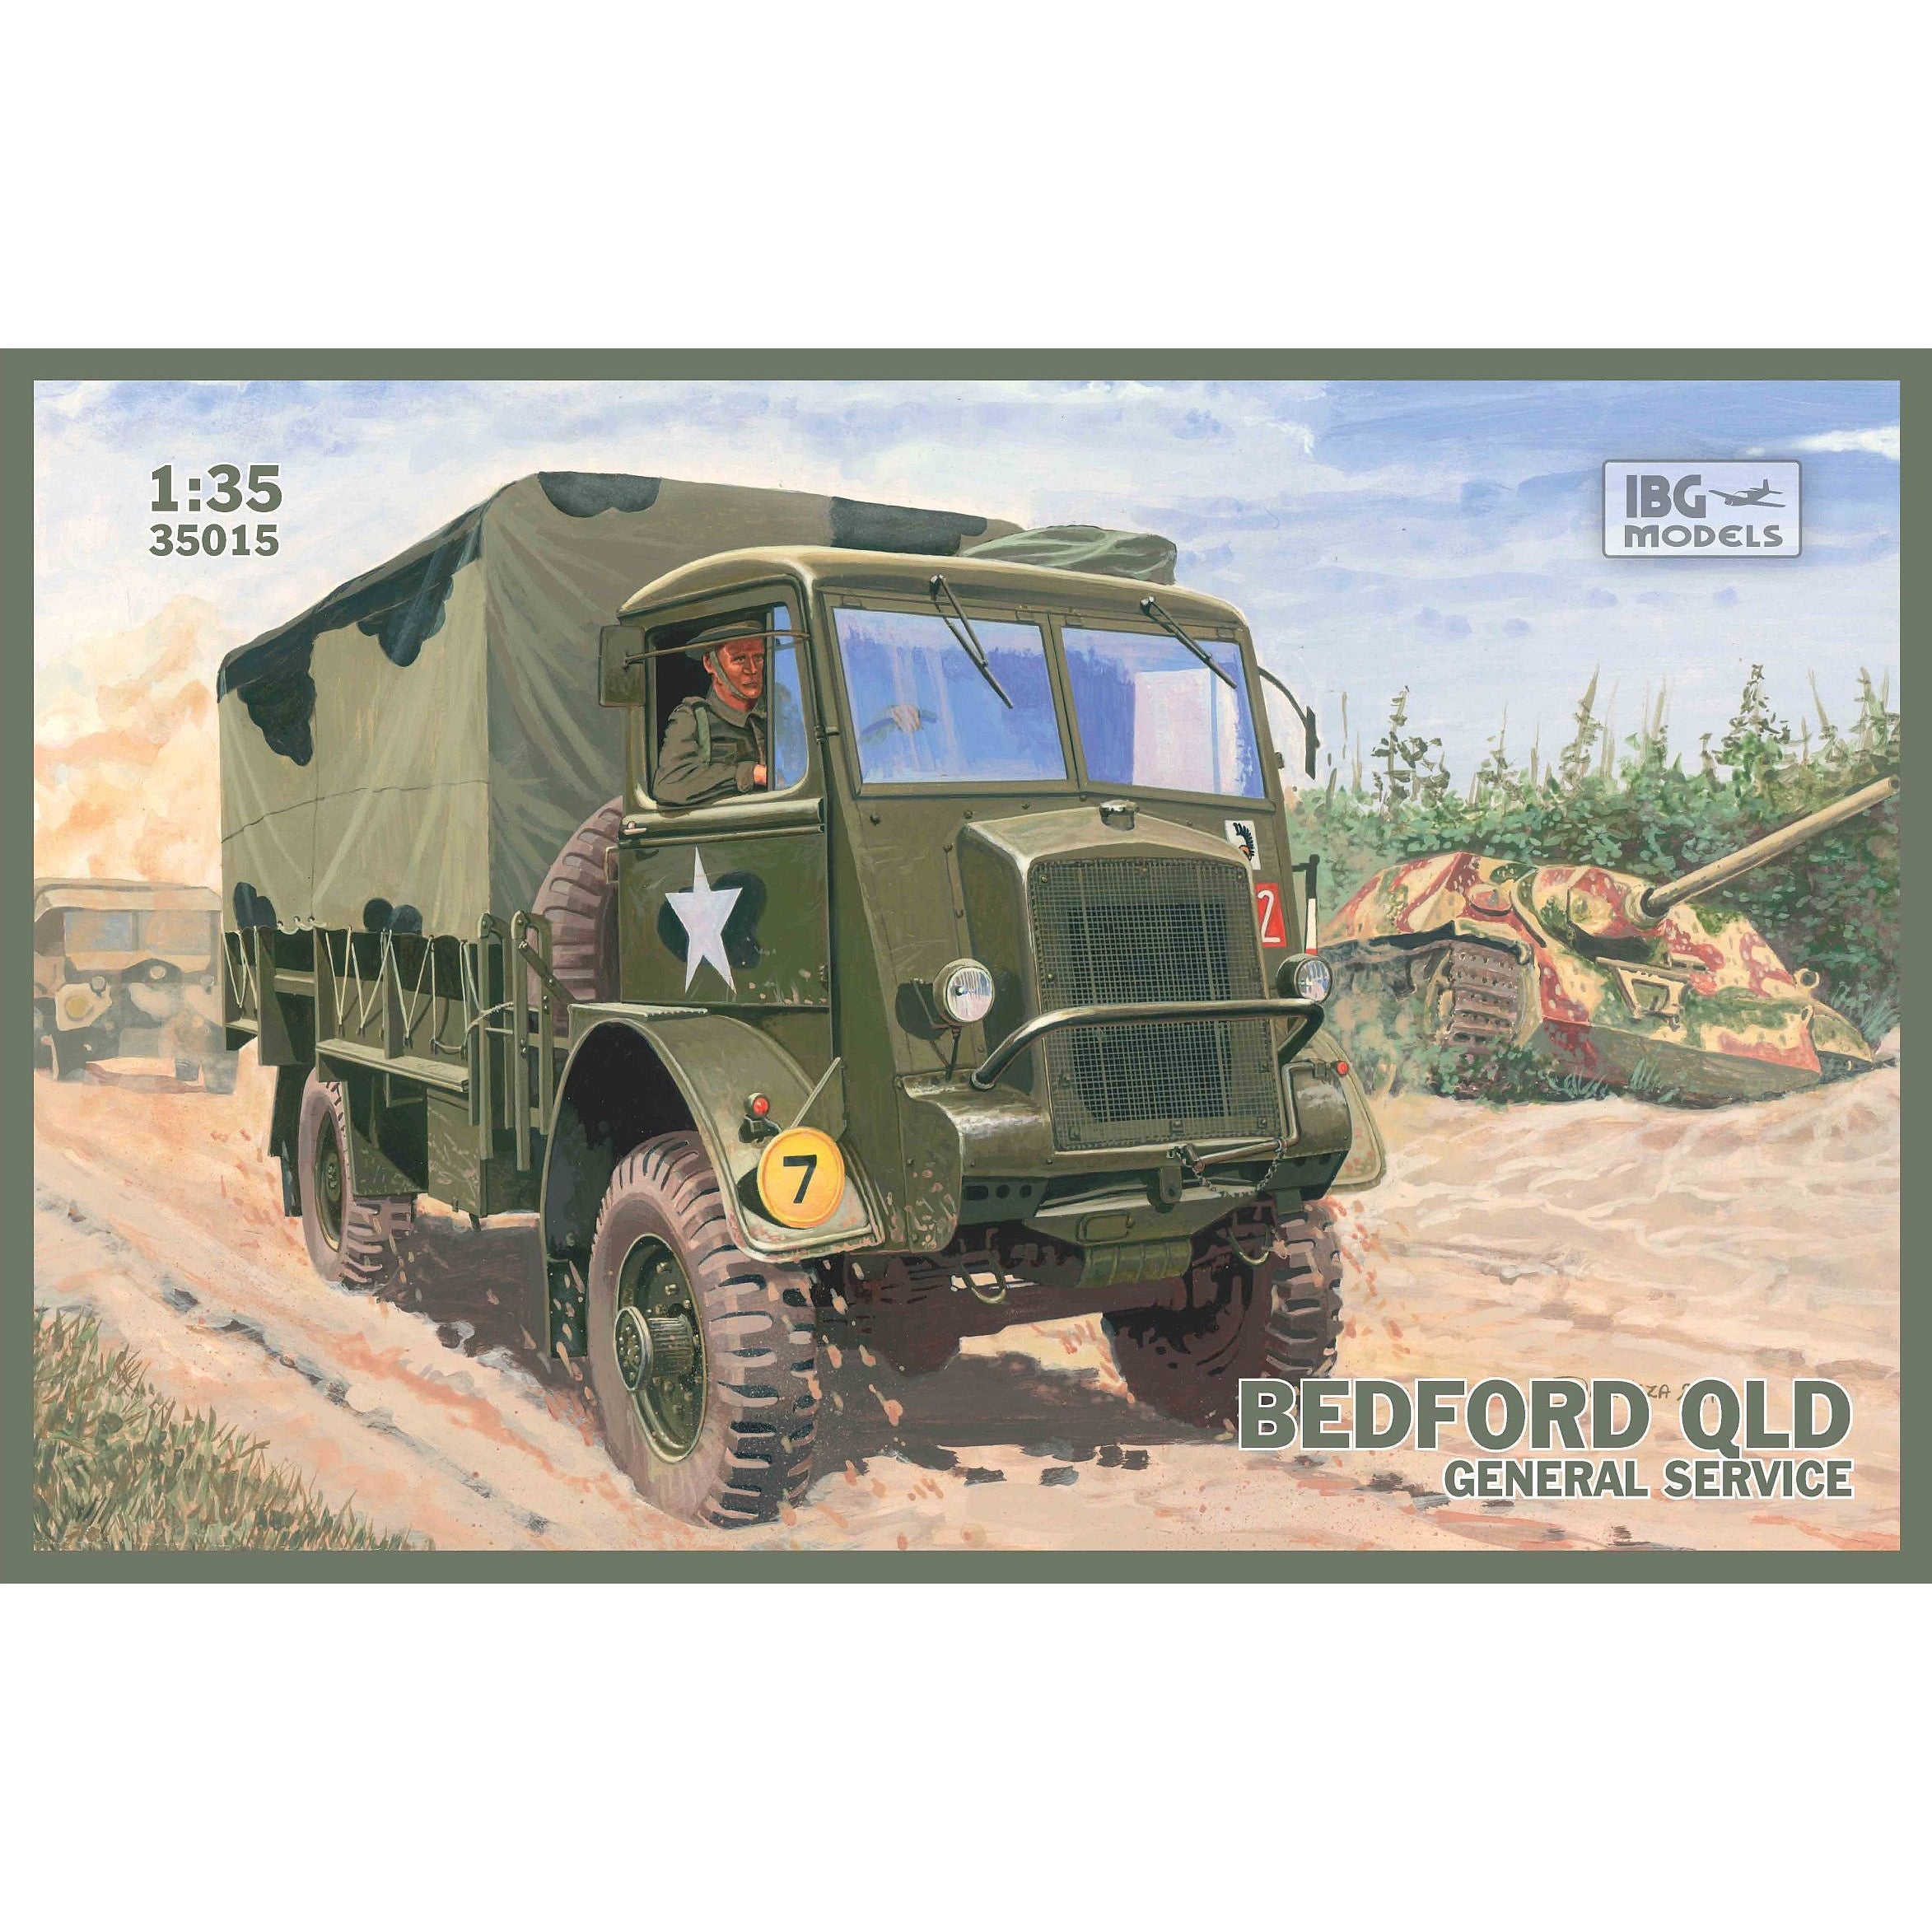 Bedford QLD General Service 1/35 #35015 by IBG Models